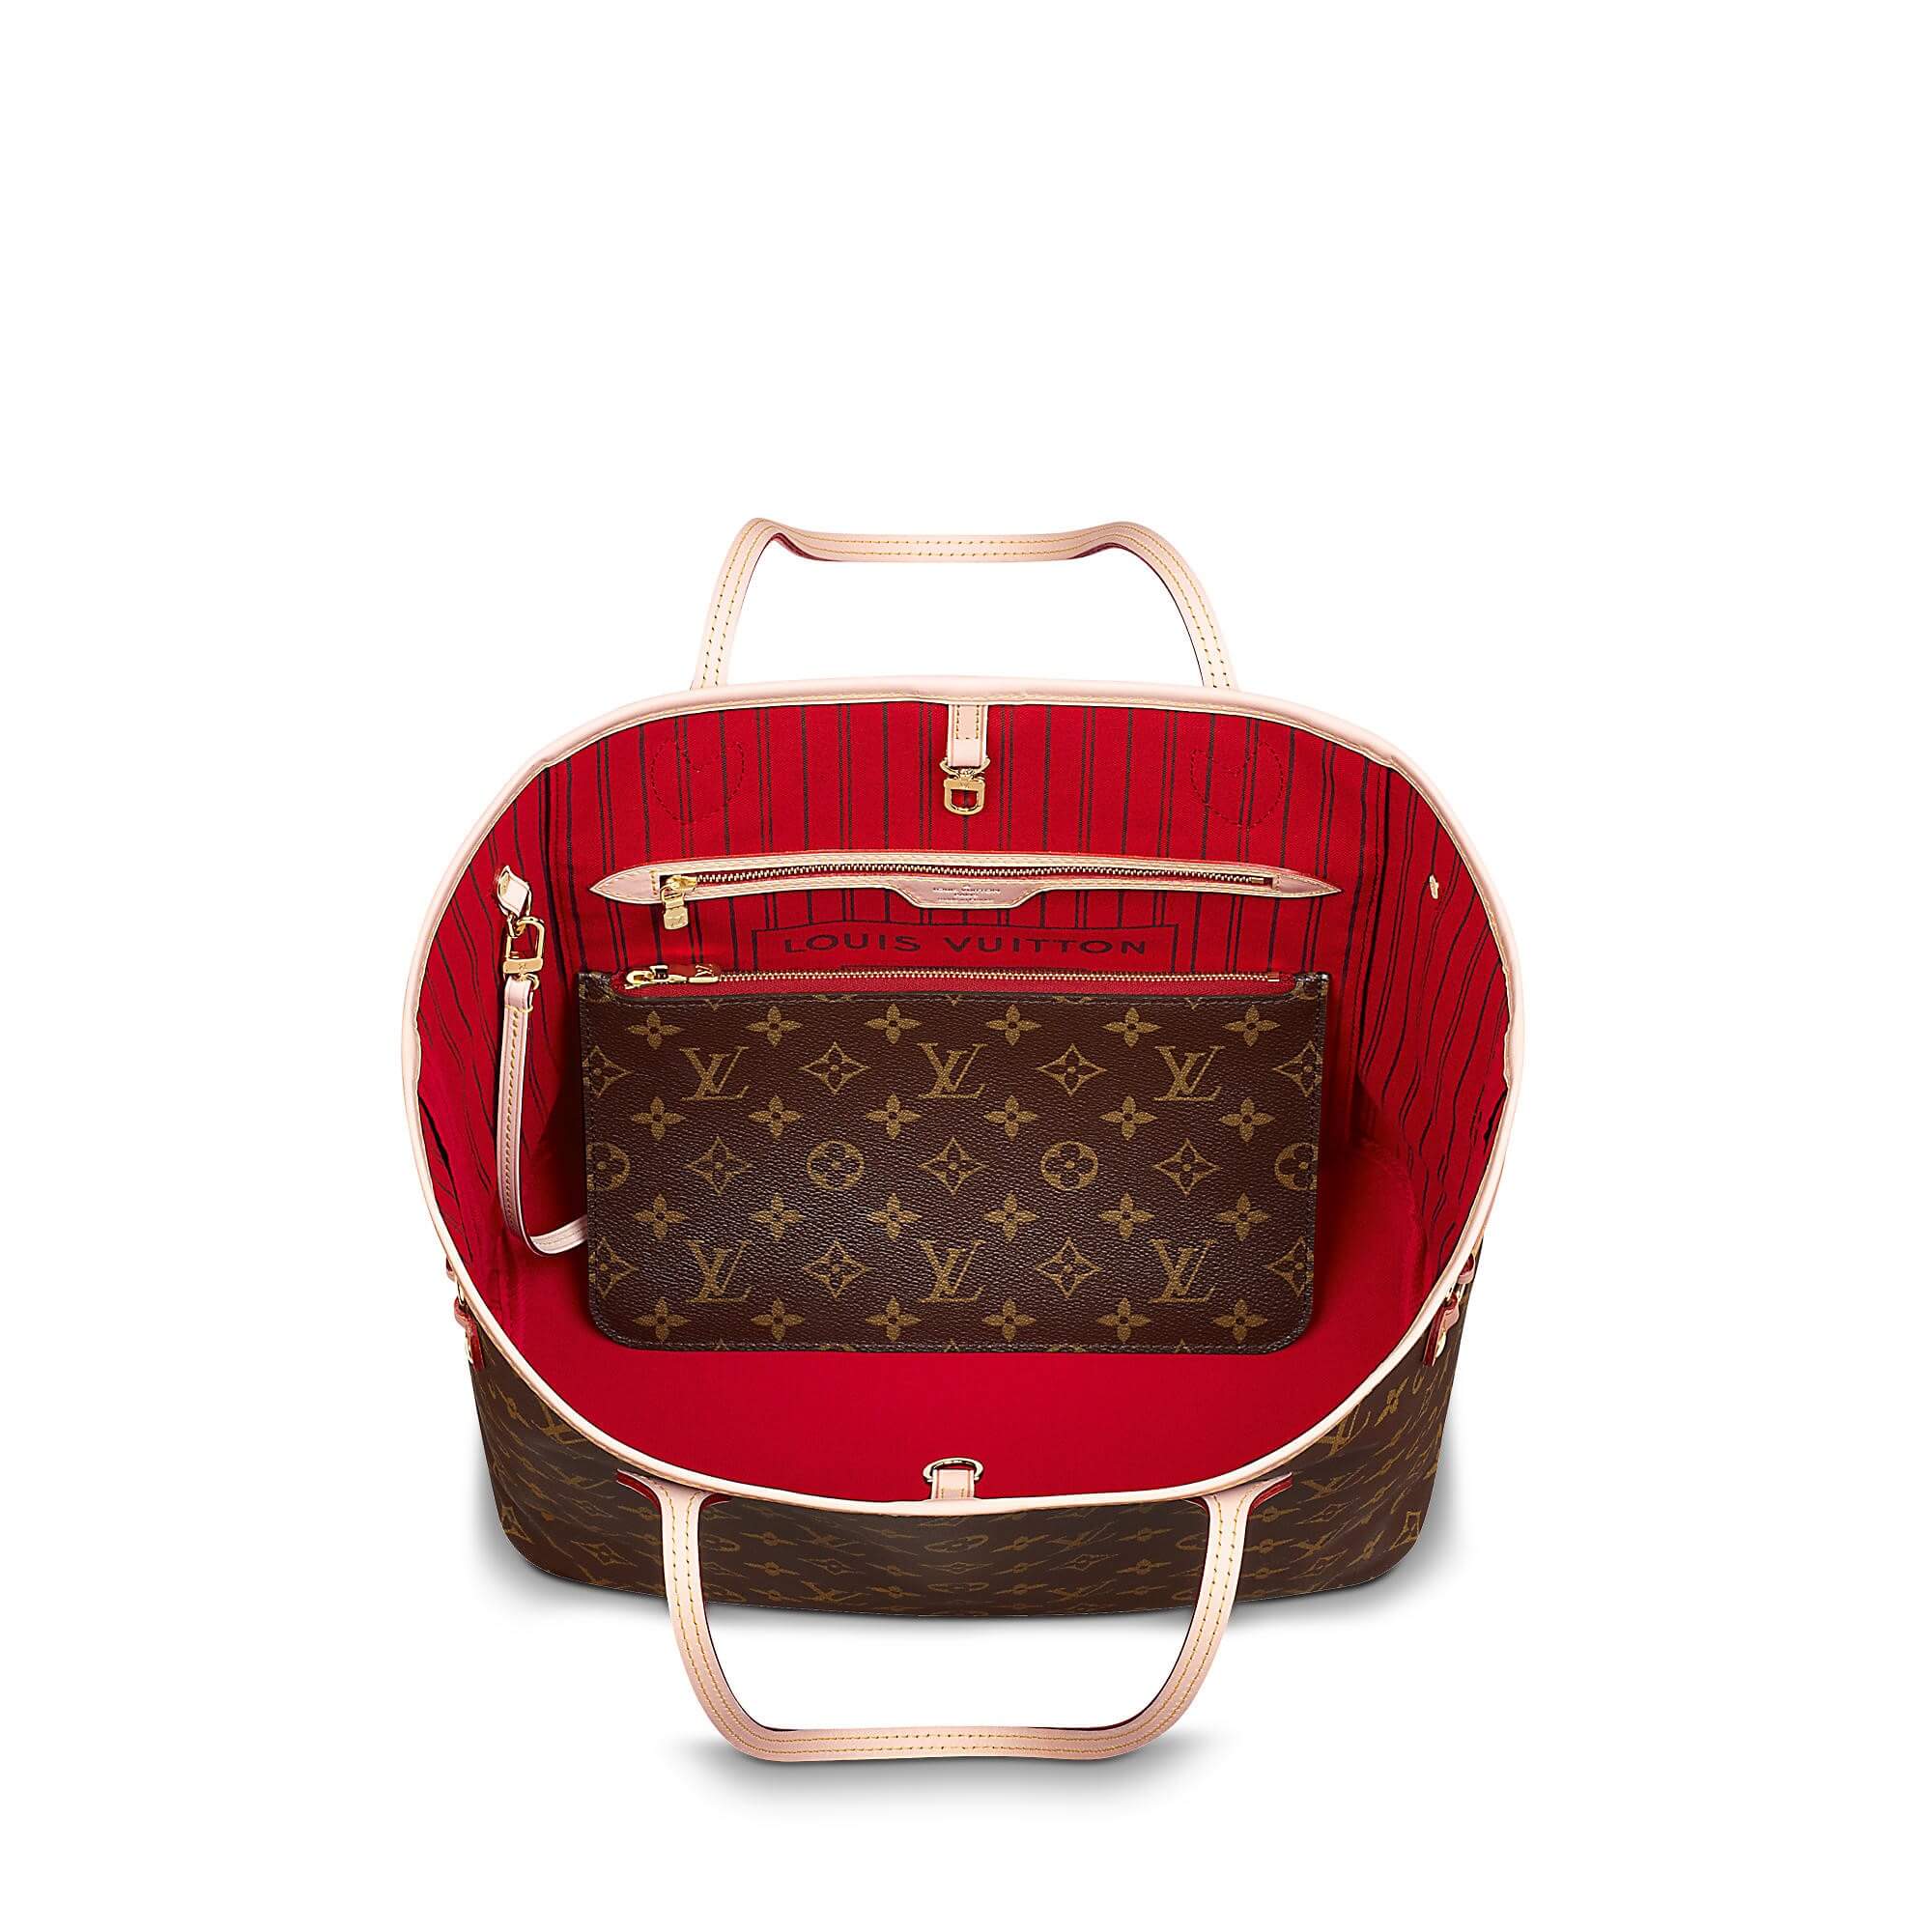 The Most Iconic Louis Vuitton Bags With The Best Stories!